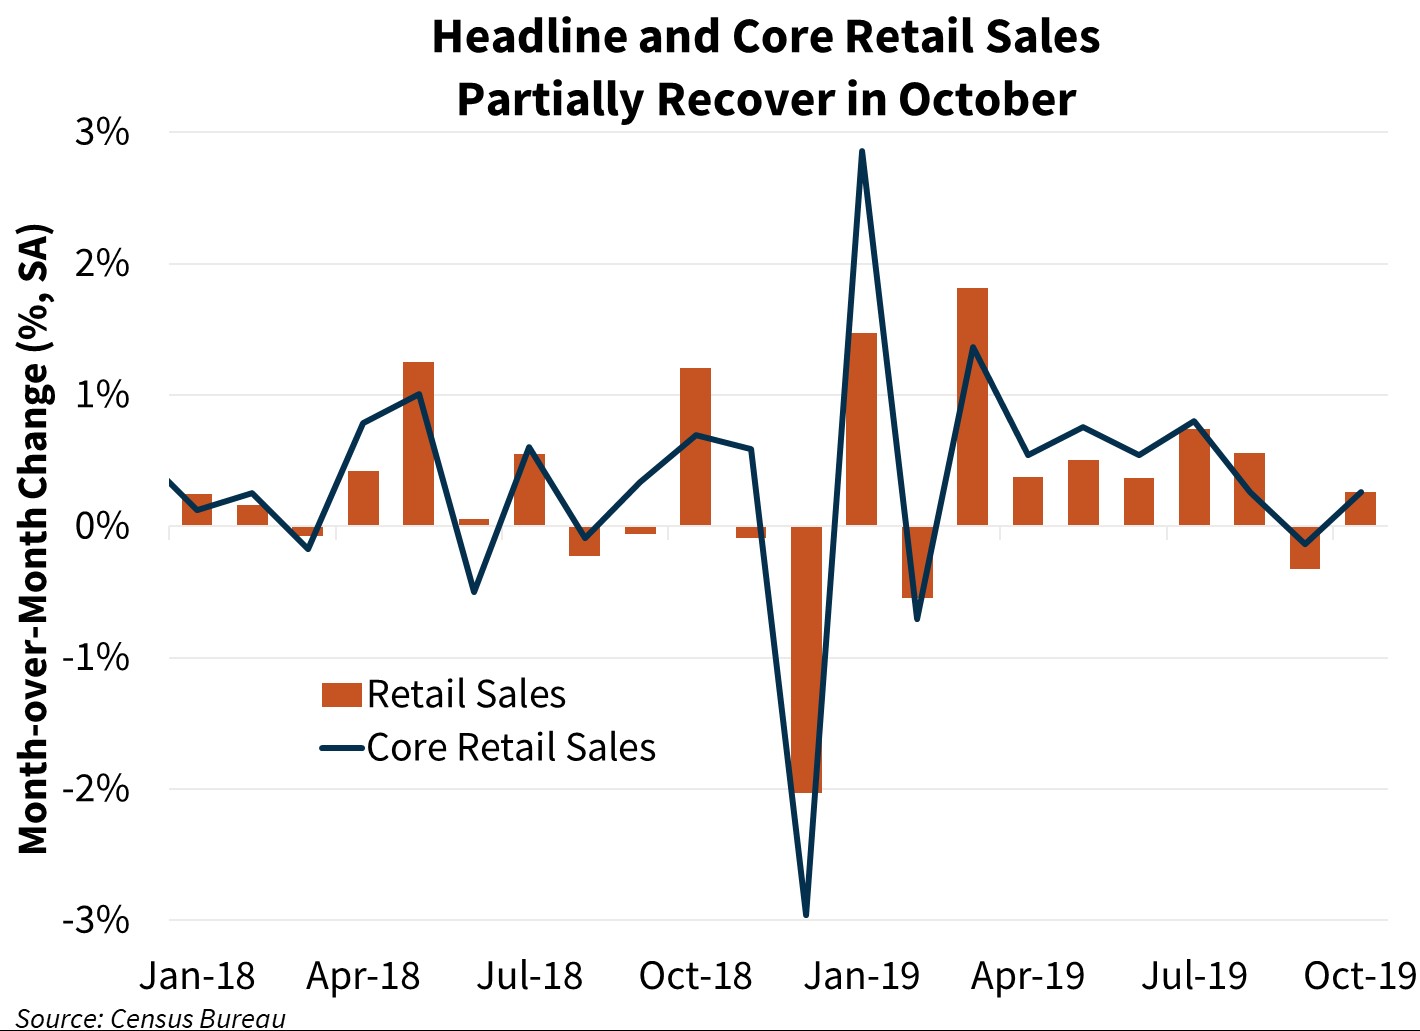 Headline and Core Retail Sales Partially Recover in October